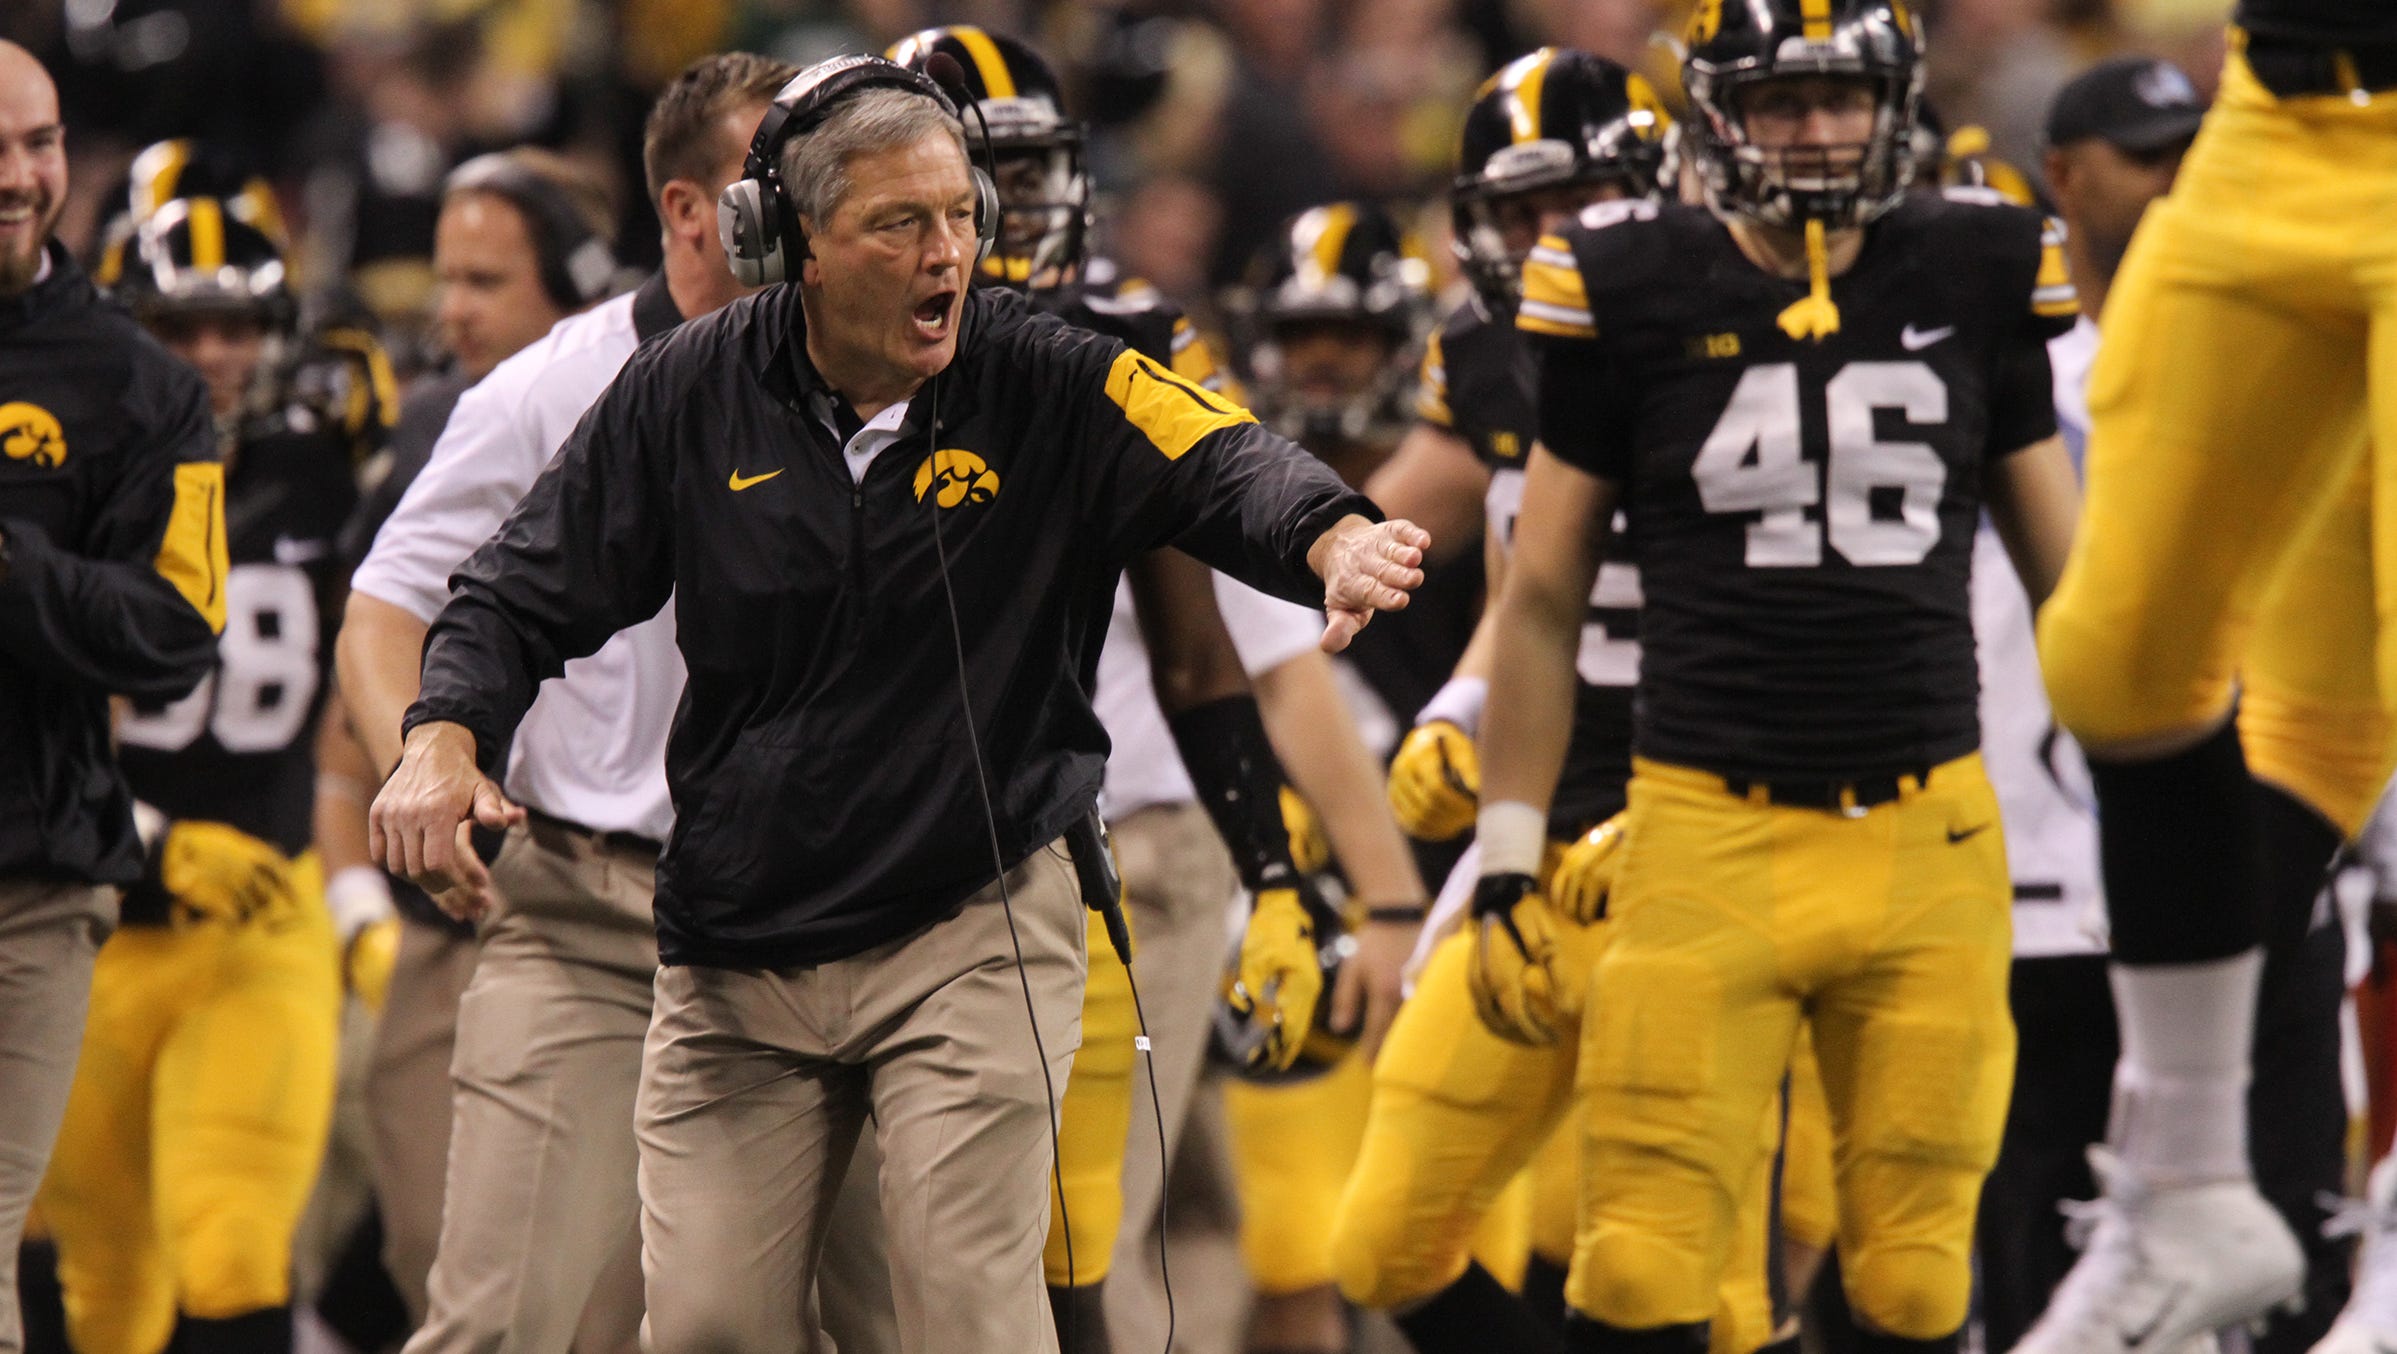 Iowa head coach Kirk Ferentz high-five's players after a fumble recovery during the Hawkeyes' Big Ten Championship game against Michigan State at Lucas Oil Stadium in Indianapolis, Ind. on Saturday, Dec. 5, 2015.